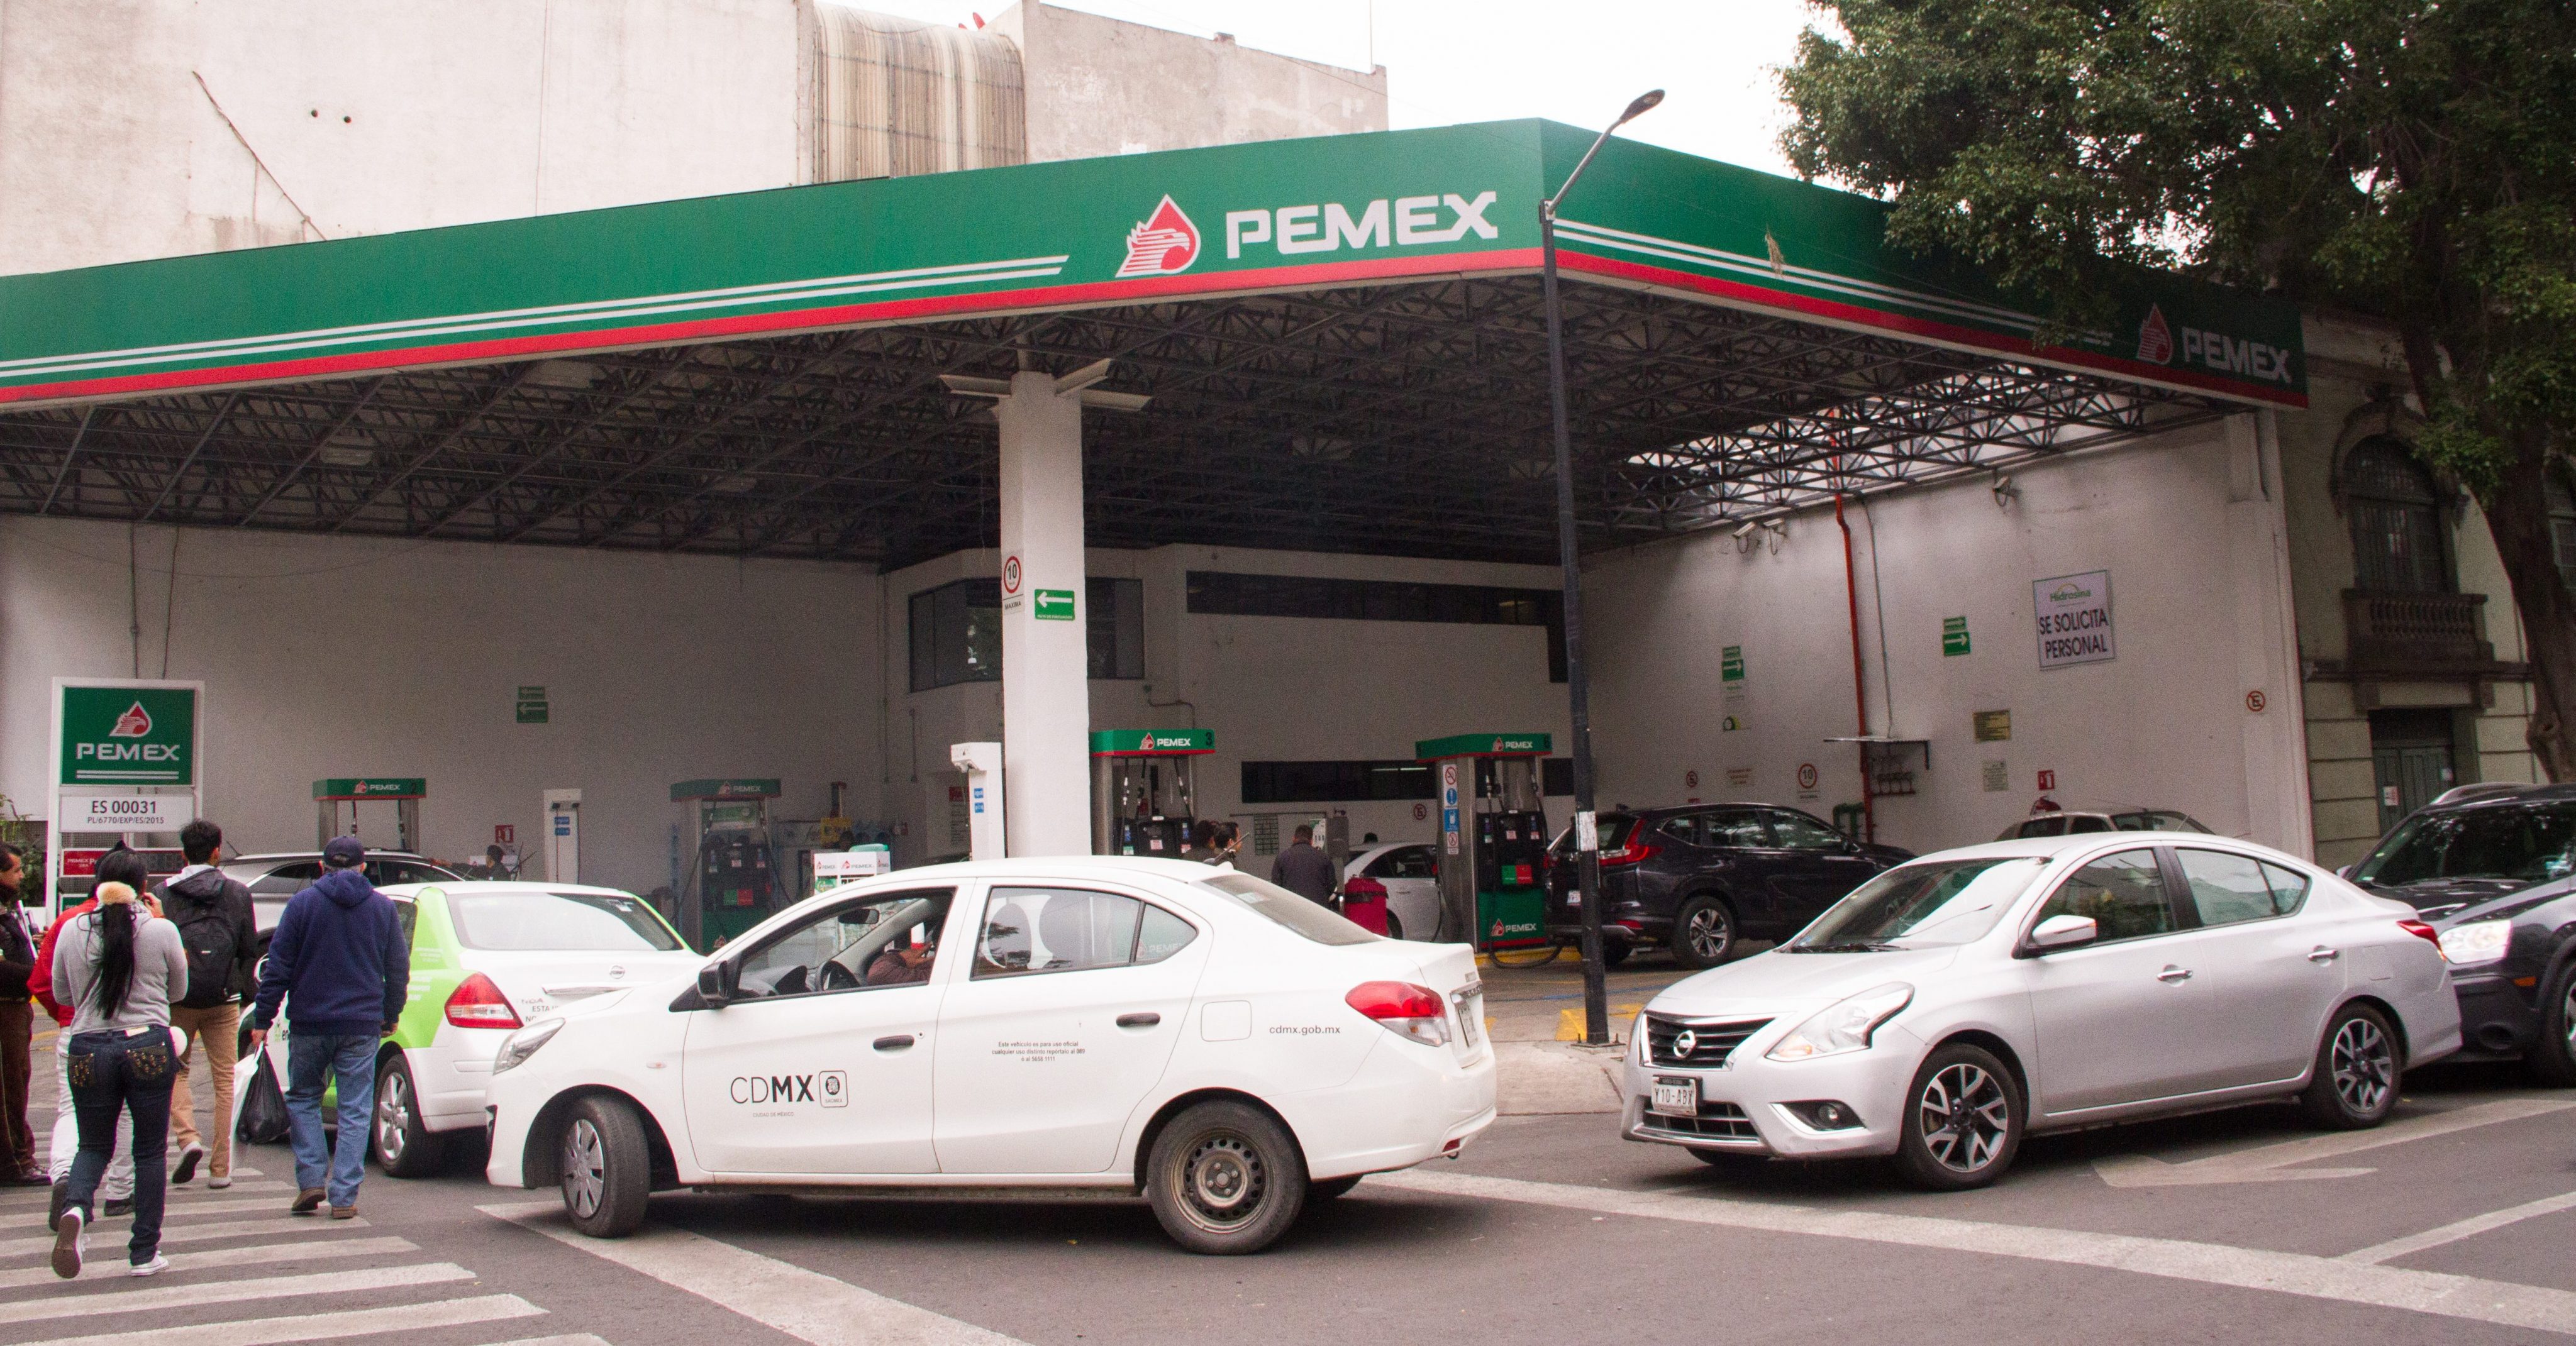 In Colima, 1400% more gasoline is consumed than in Edomex